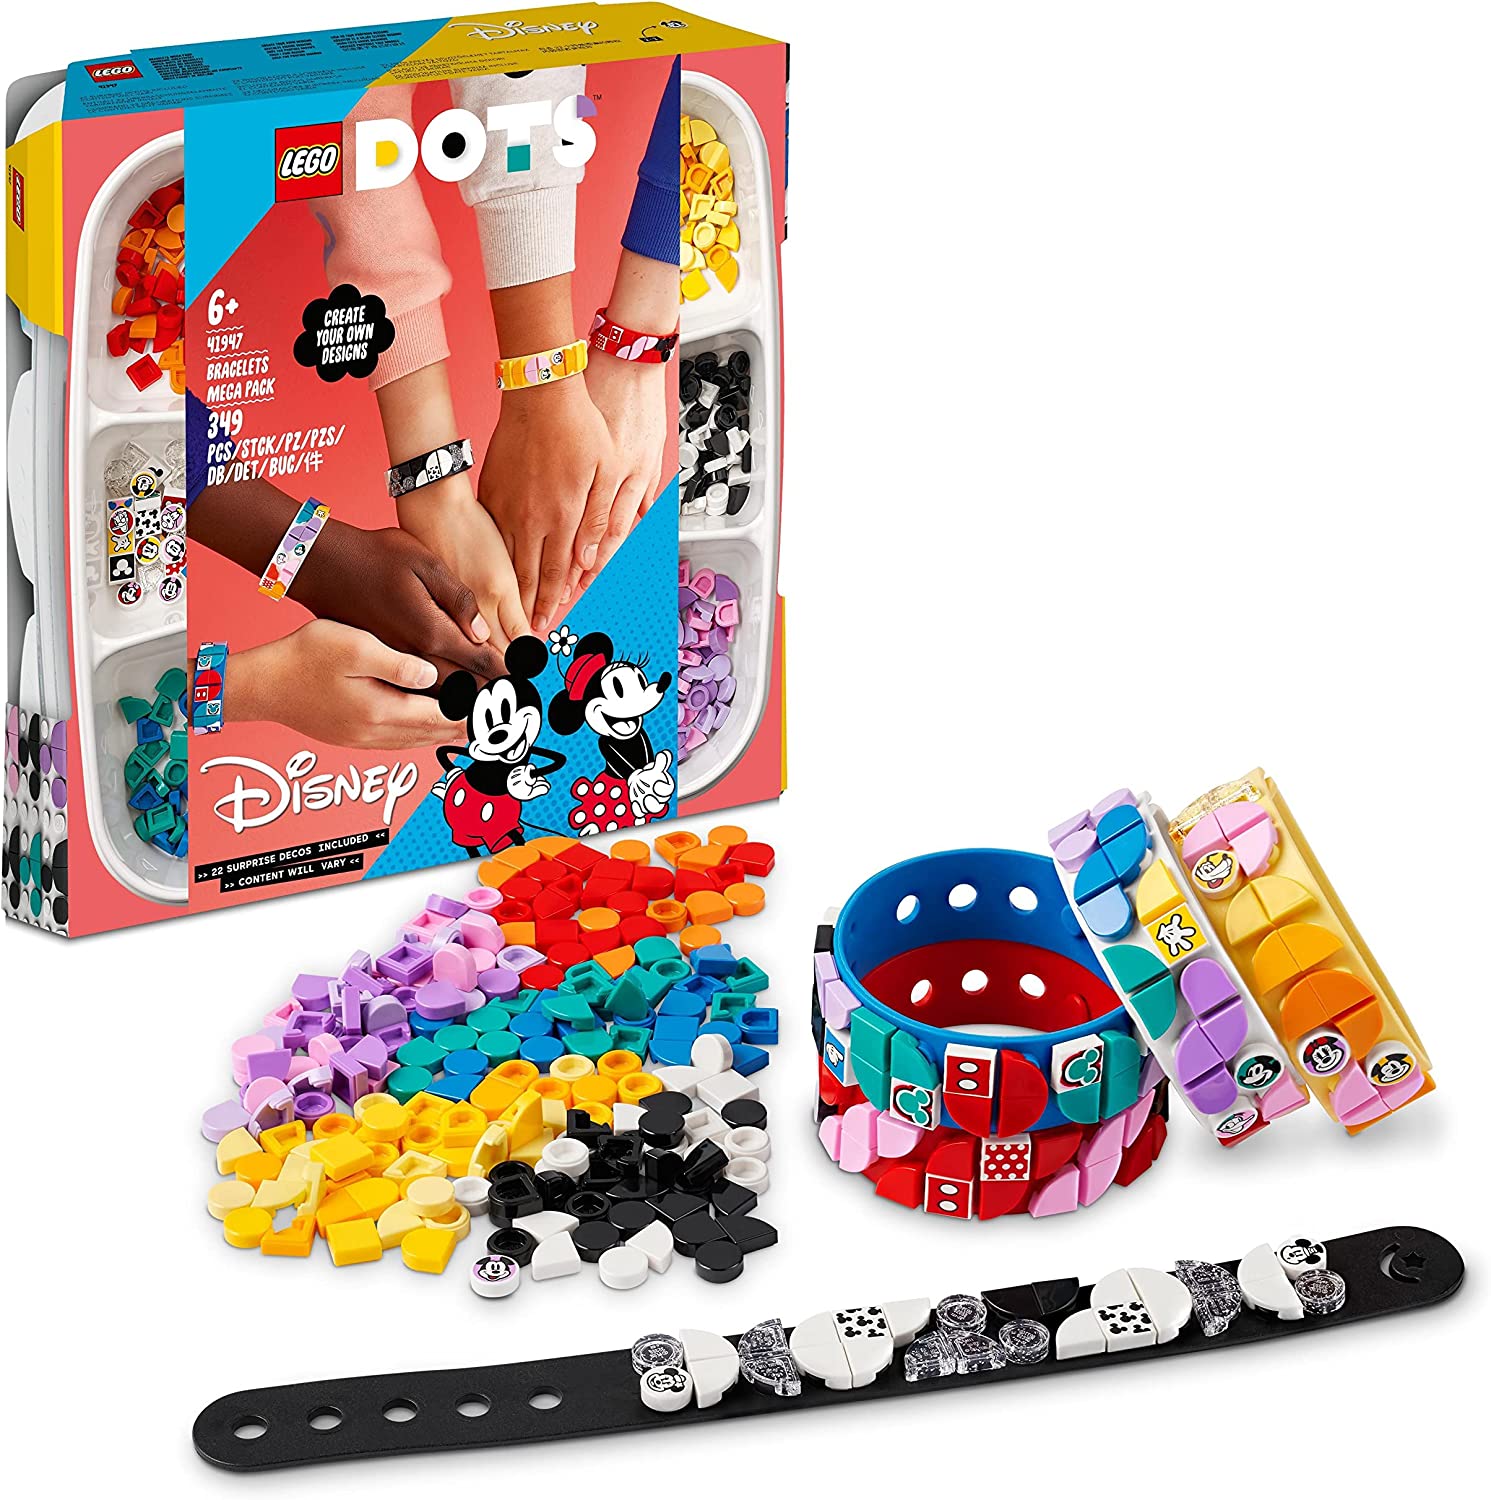 LEGO DOTS 41947 Disney Mickey Bracelet Creative Kit, 5-in-1 Craft Kit, DIY Jewellery Set for Kids, with Glitter and Minnie Mouse Stones